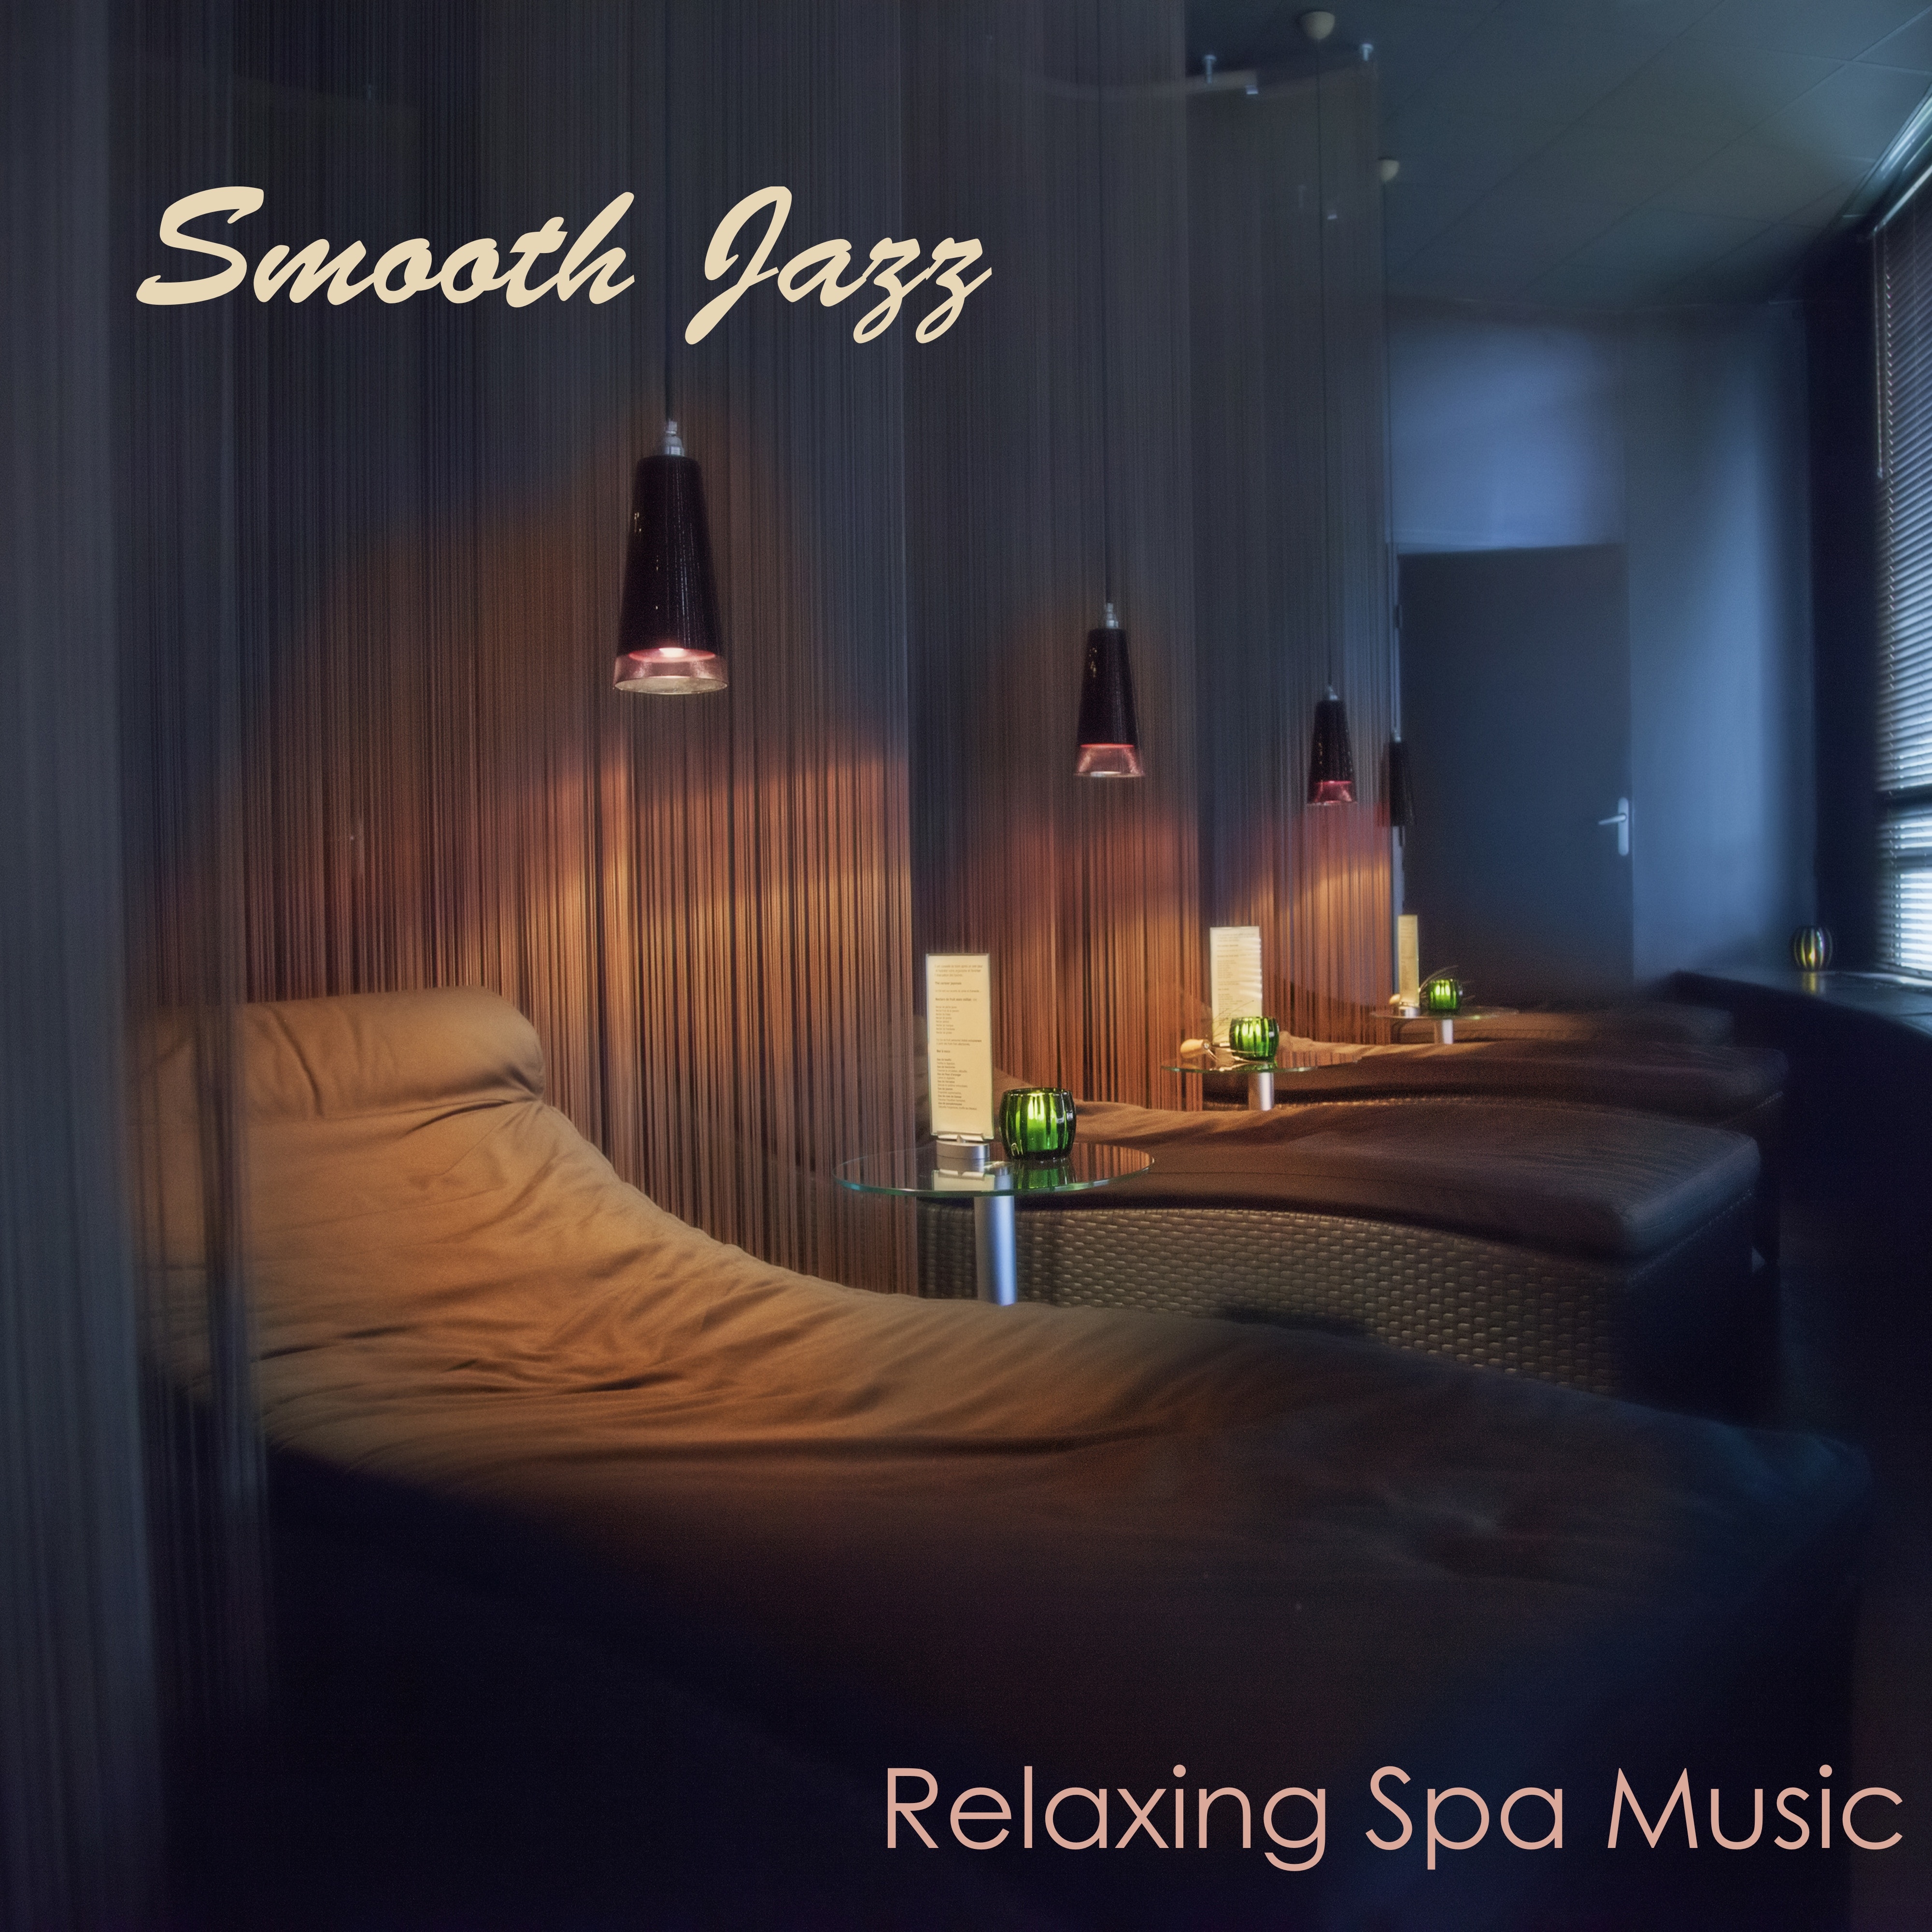 Smooth Jazz Relaxing Spa Music - Lounge Music & Cool Instrumental Songs 4 Spa Massage Backgrounds